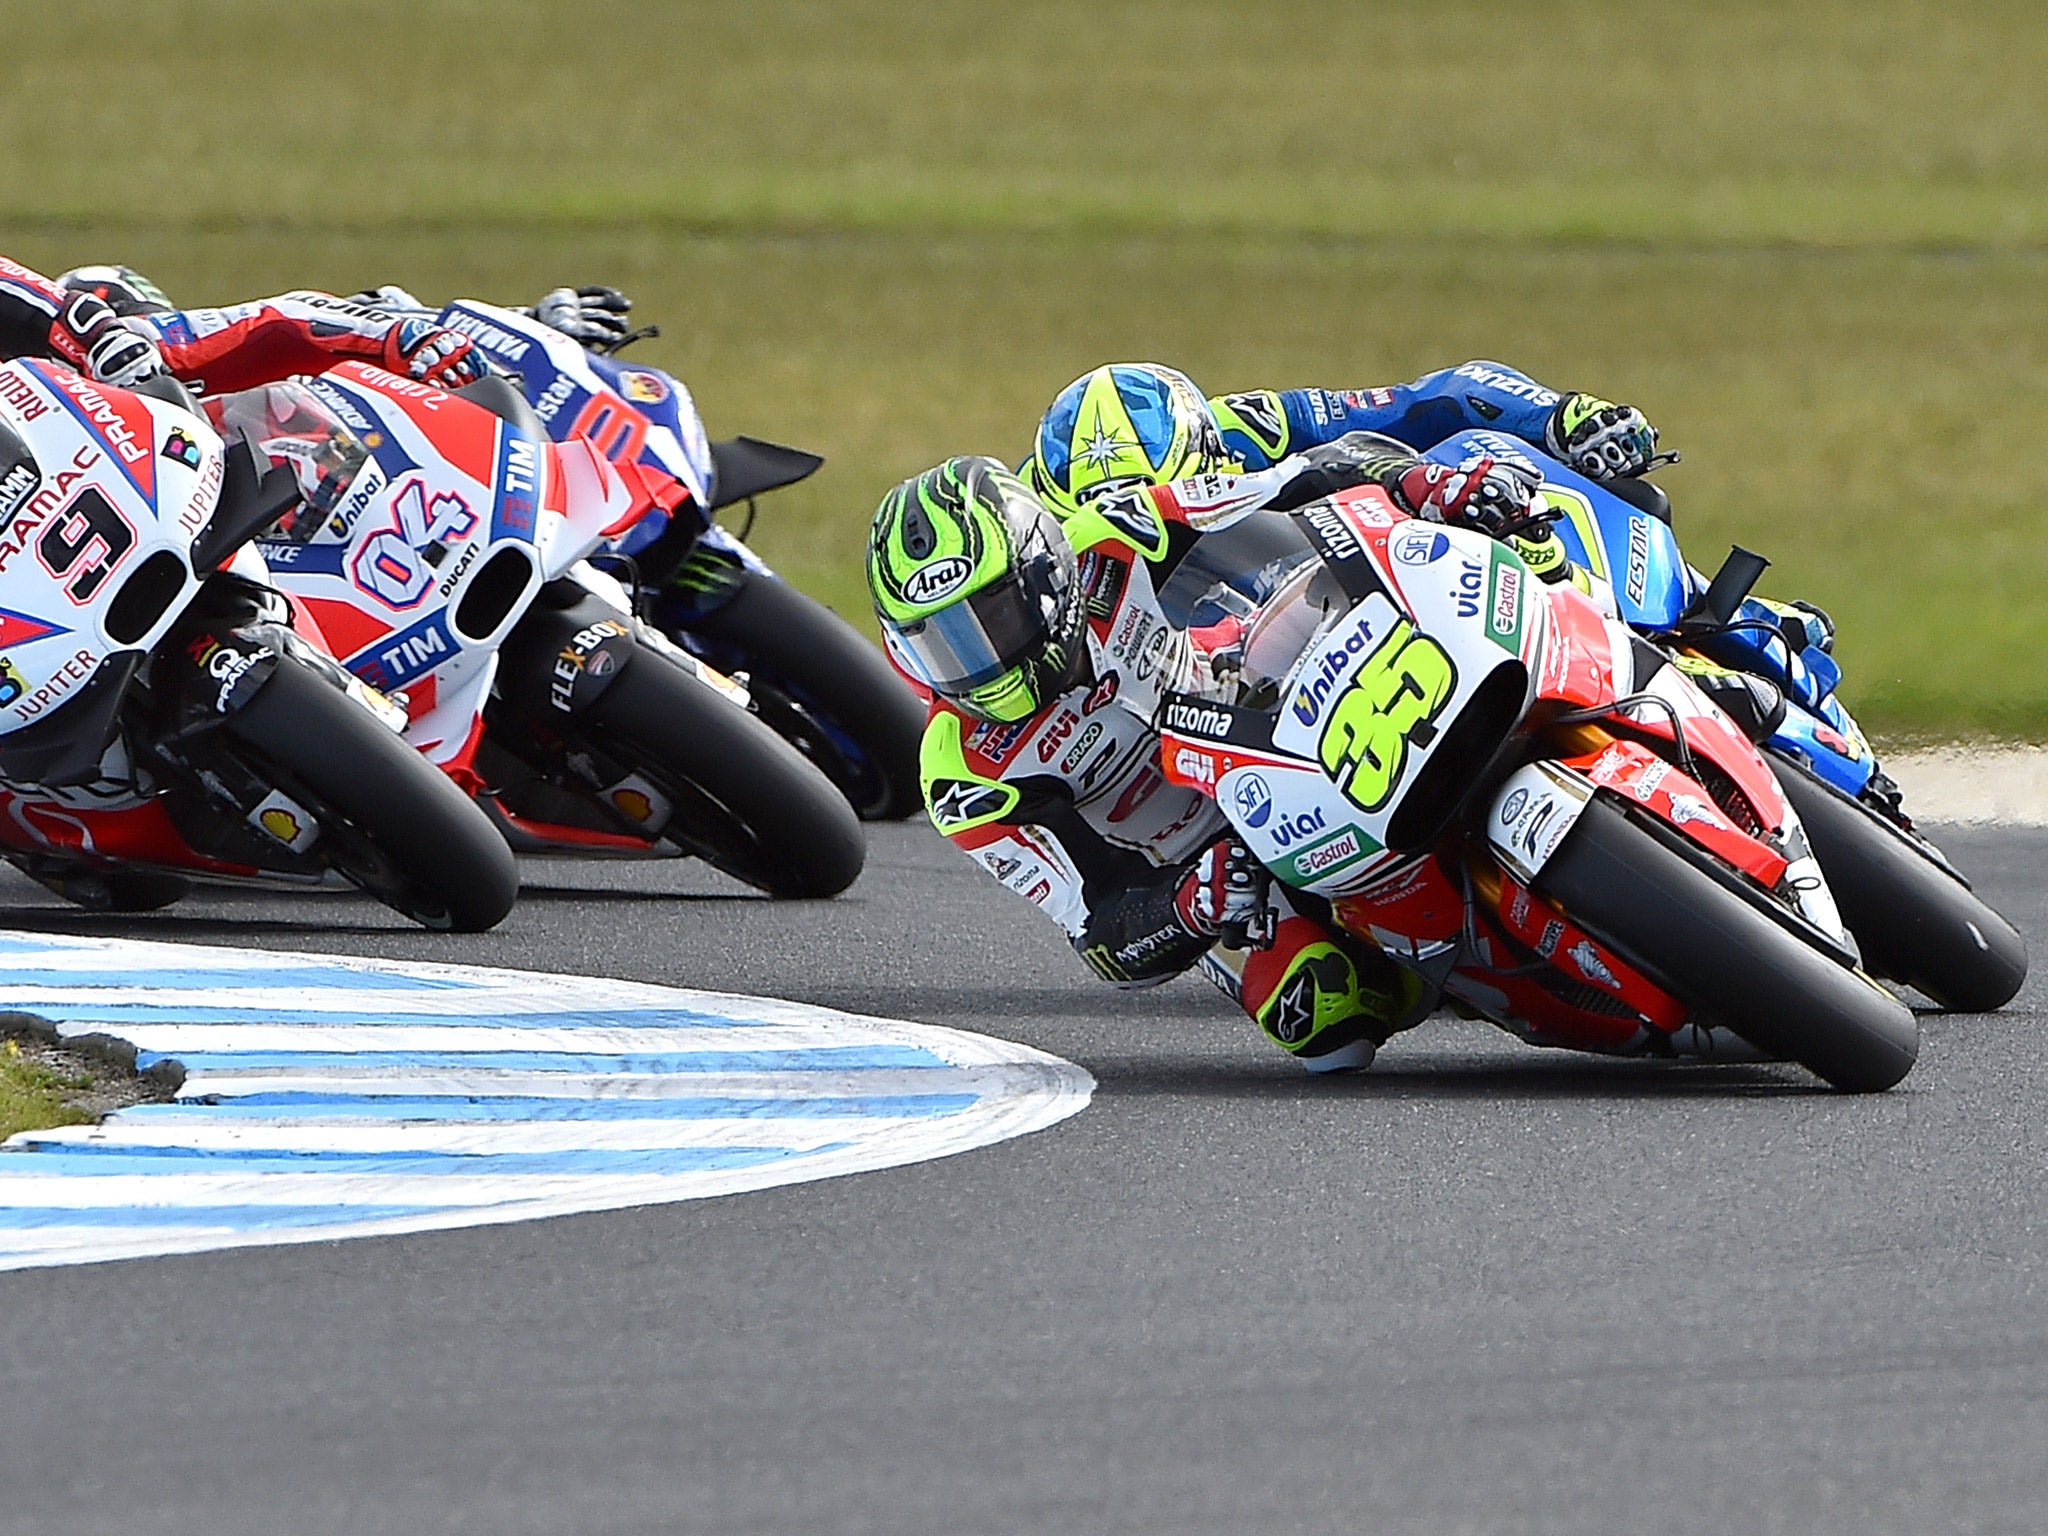 Crutchlow leads the field at Phillip Island